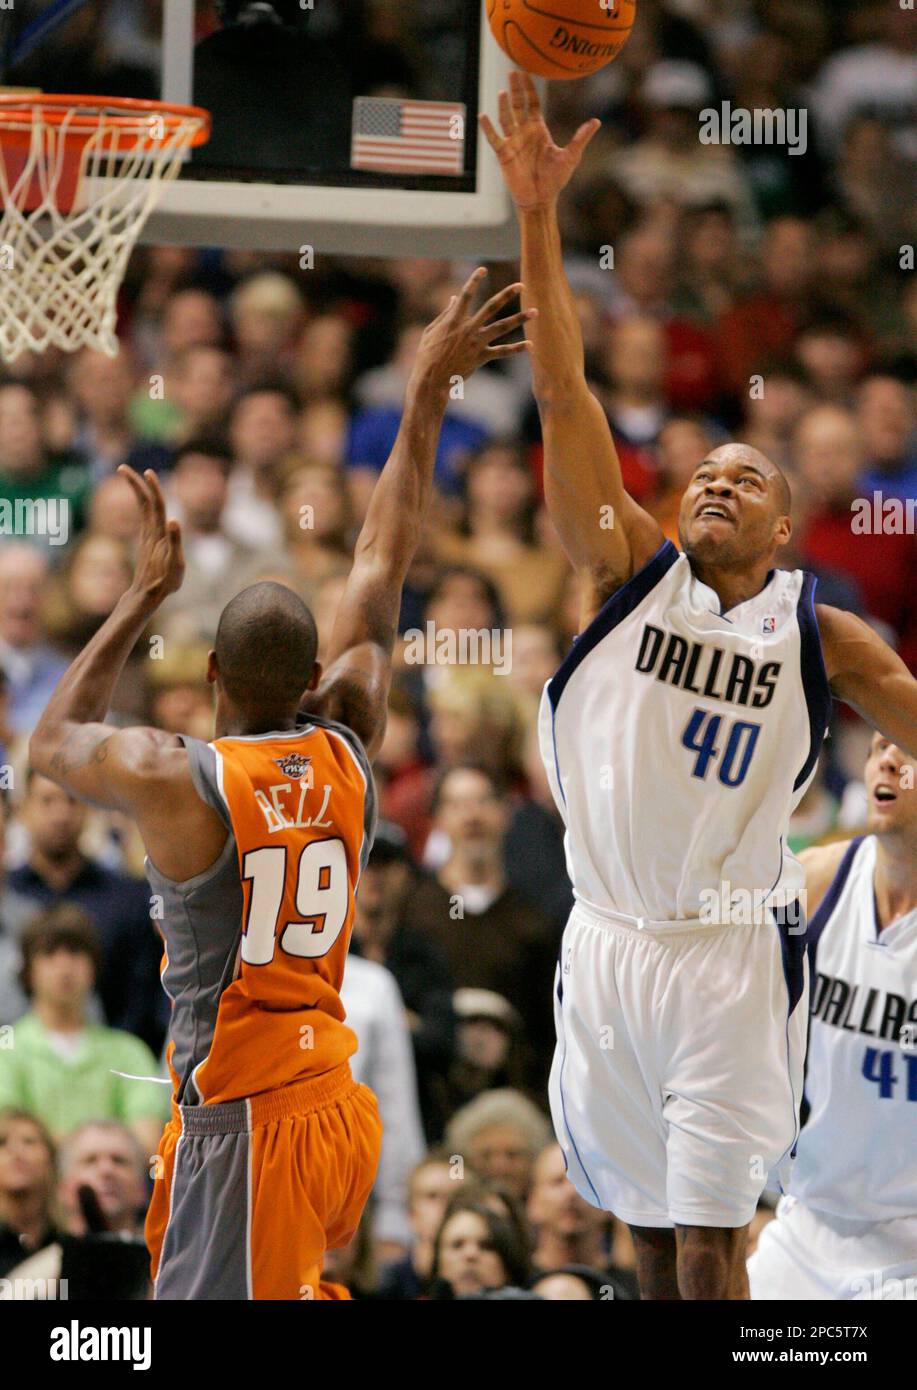 Dallas Mavericks forward Devean George (40) knocks the ball away from  Phoenix Suns guard Raja Bell (19) as he shoots the ball in the second half  of an NBA basketball game in